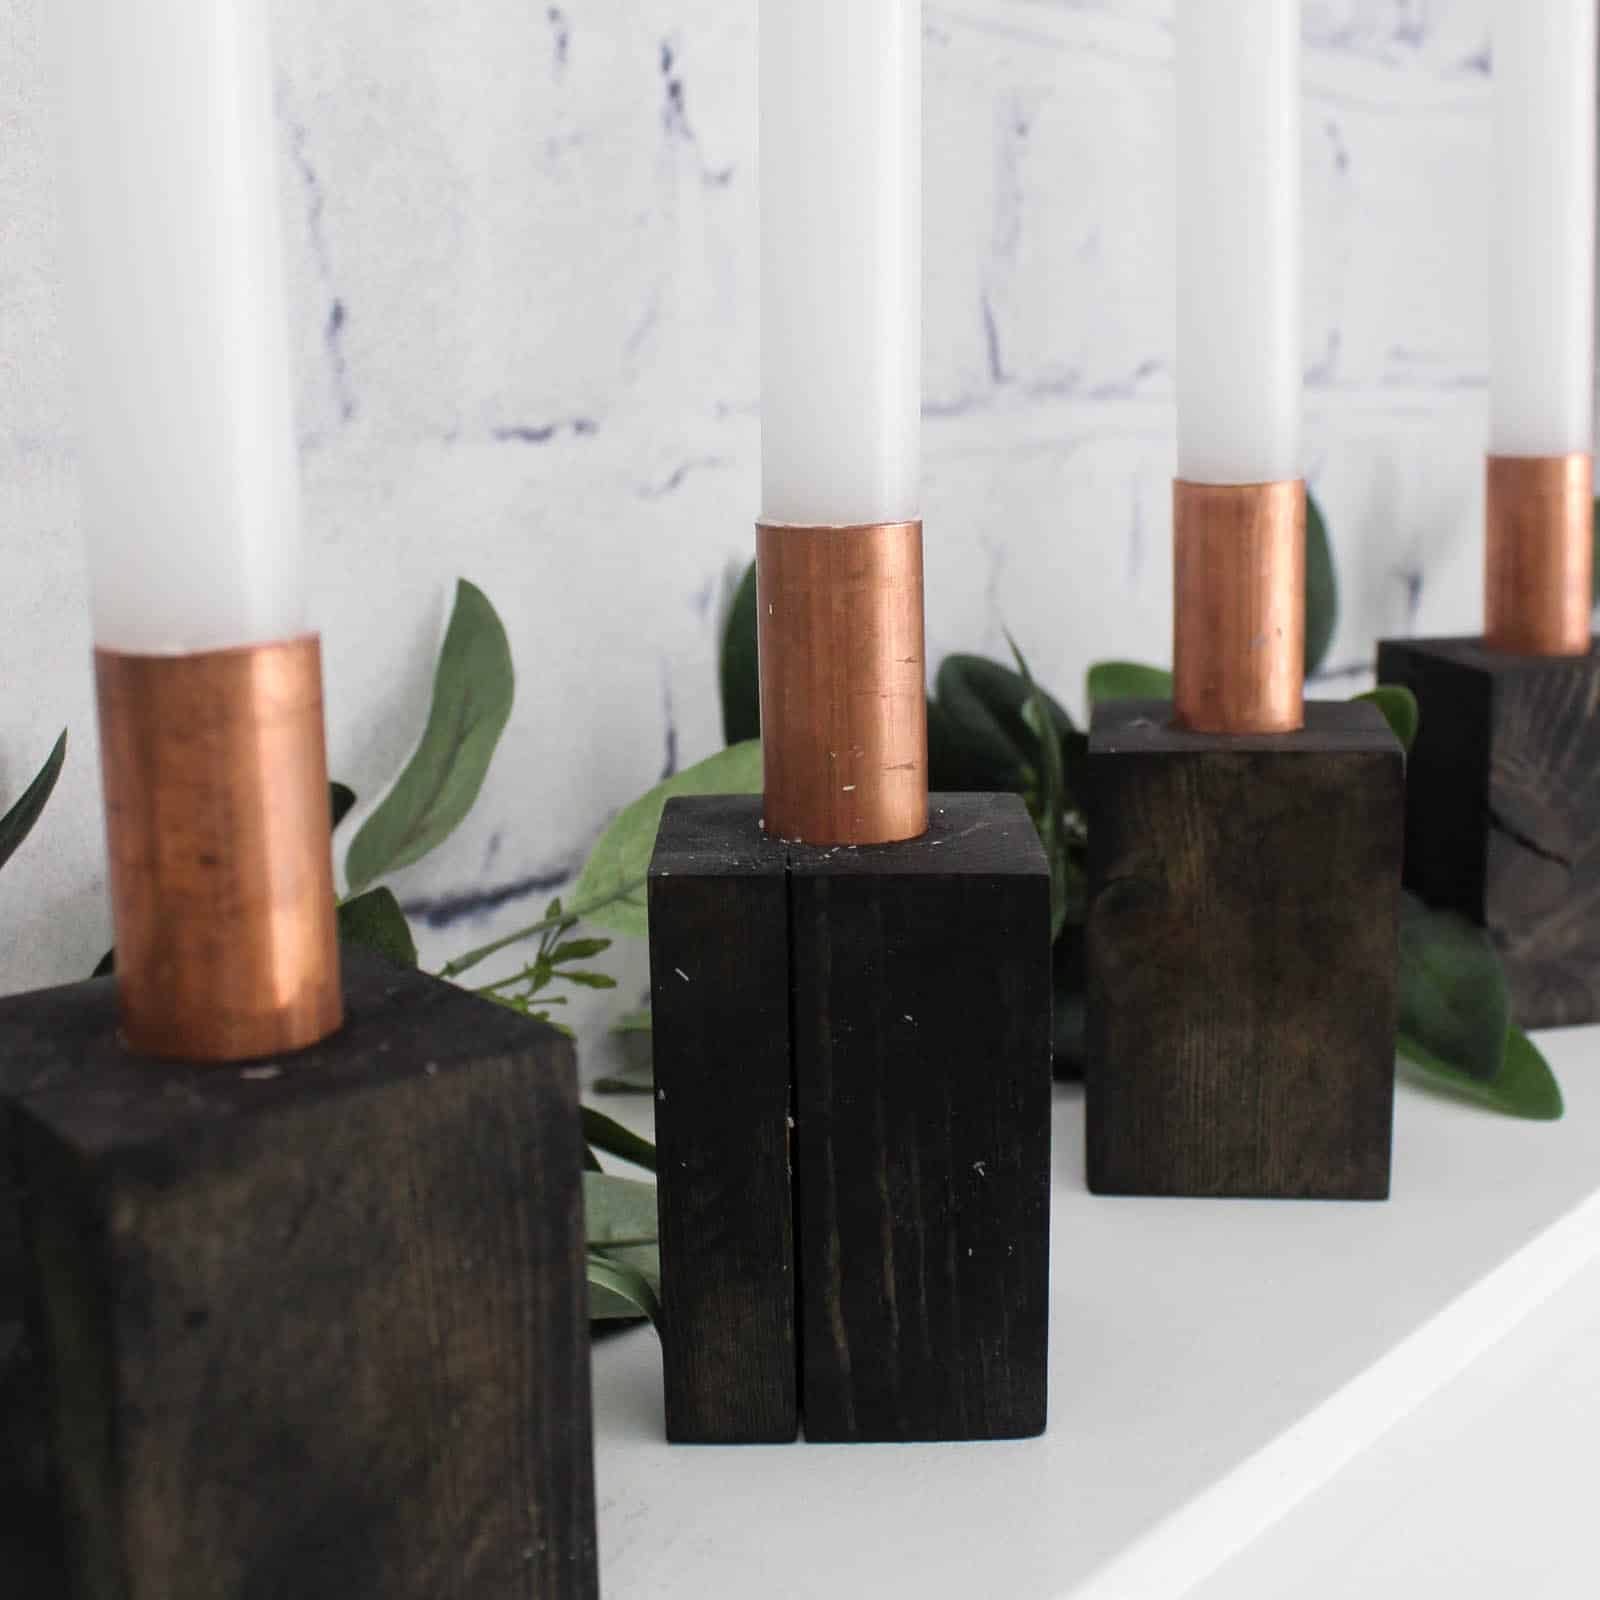 I love these beautiful modern Advent Candlesticks. This DIY is the perfect addition to your Christmas decor and the perfect way to celebrate the meaning behind Christmas. The addition to celebrate advent this holiday season!